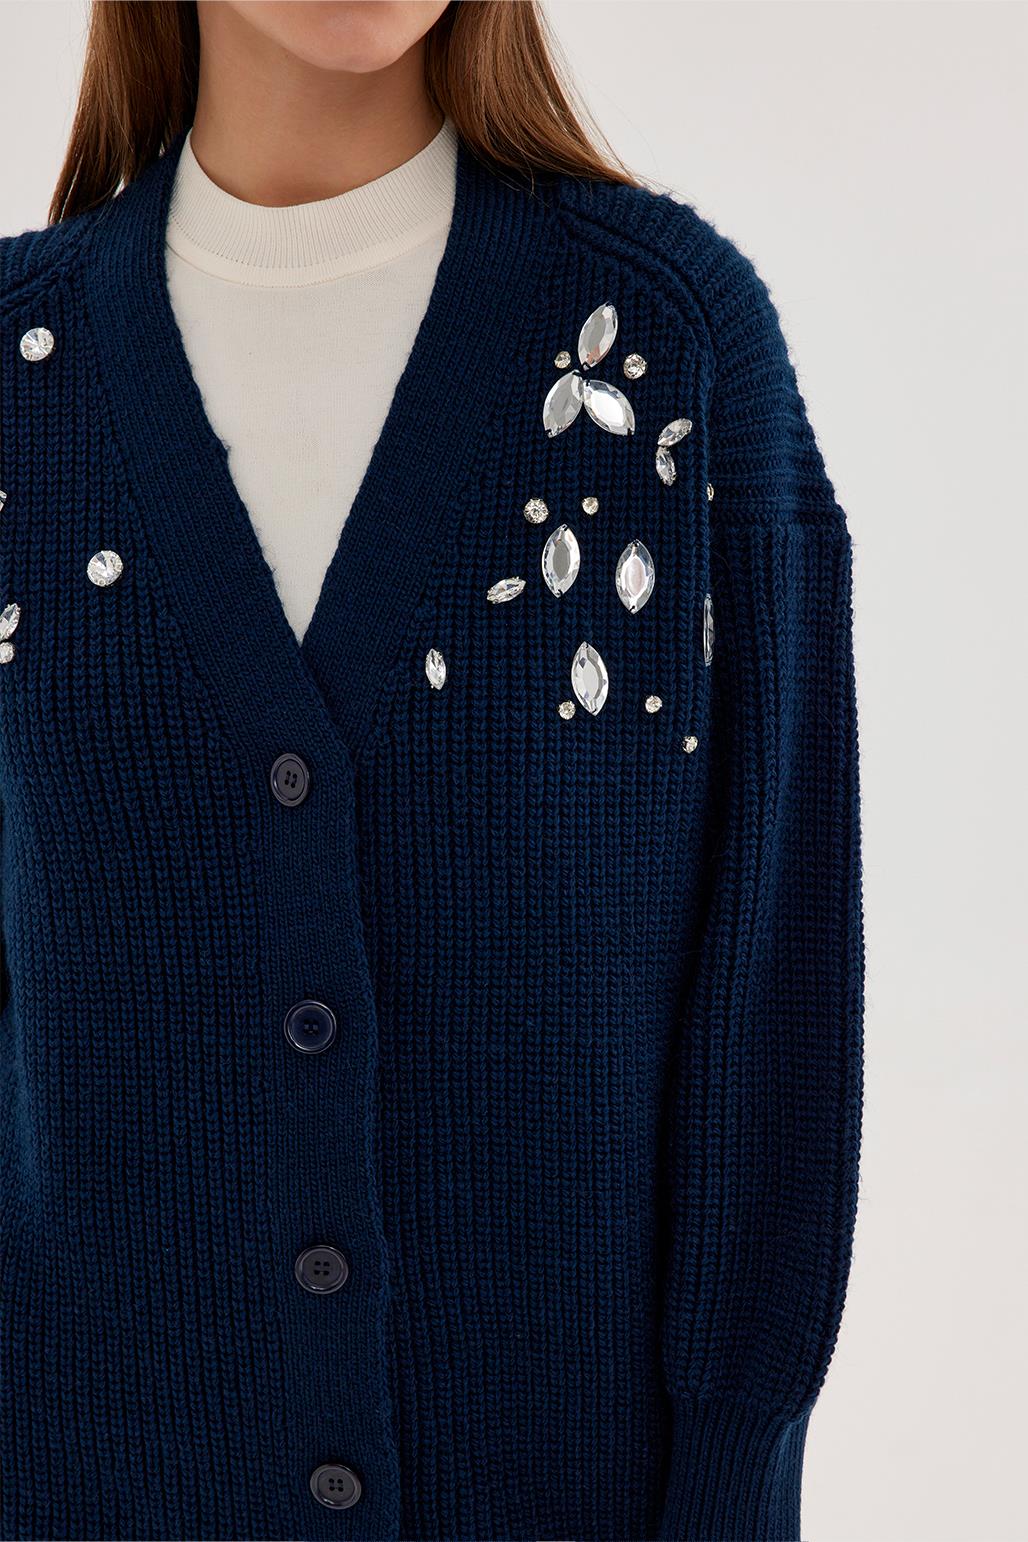 Stone Embroidered Cardigan Navy Blue